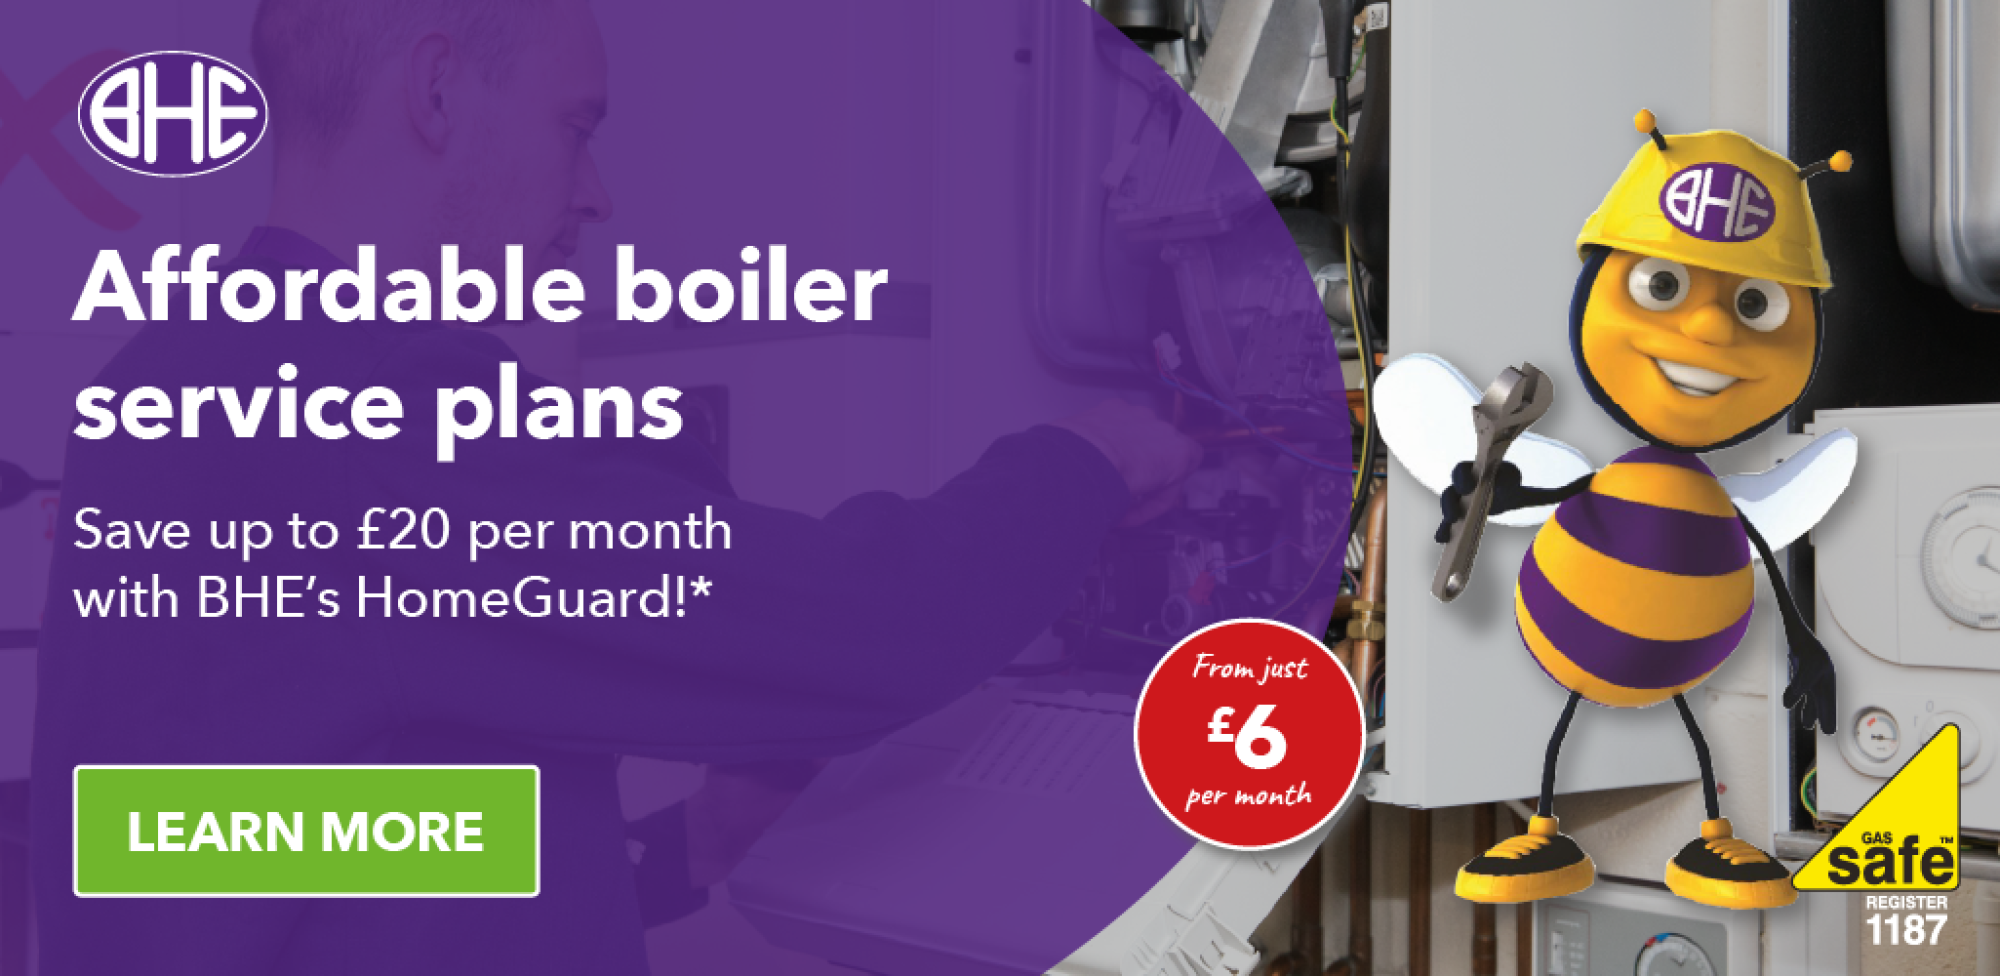 Affordable HomeGuard boiler service plans by BHE Bolton